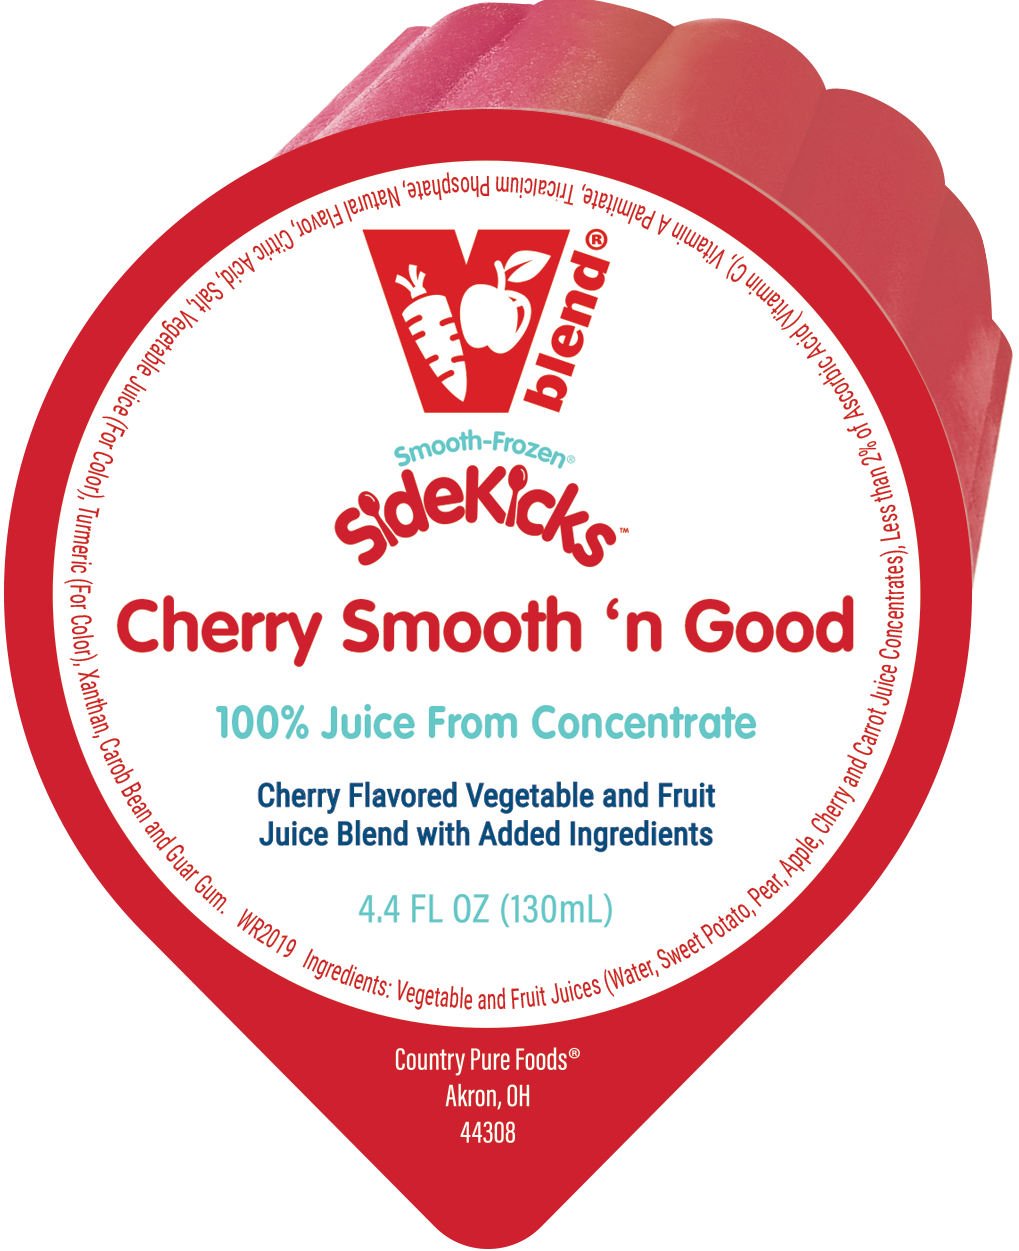 Smooth-Frozen SideKicks Cherry Smooth 'n Good - Country Pure